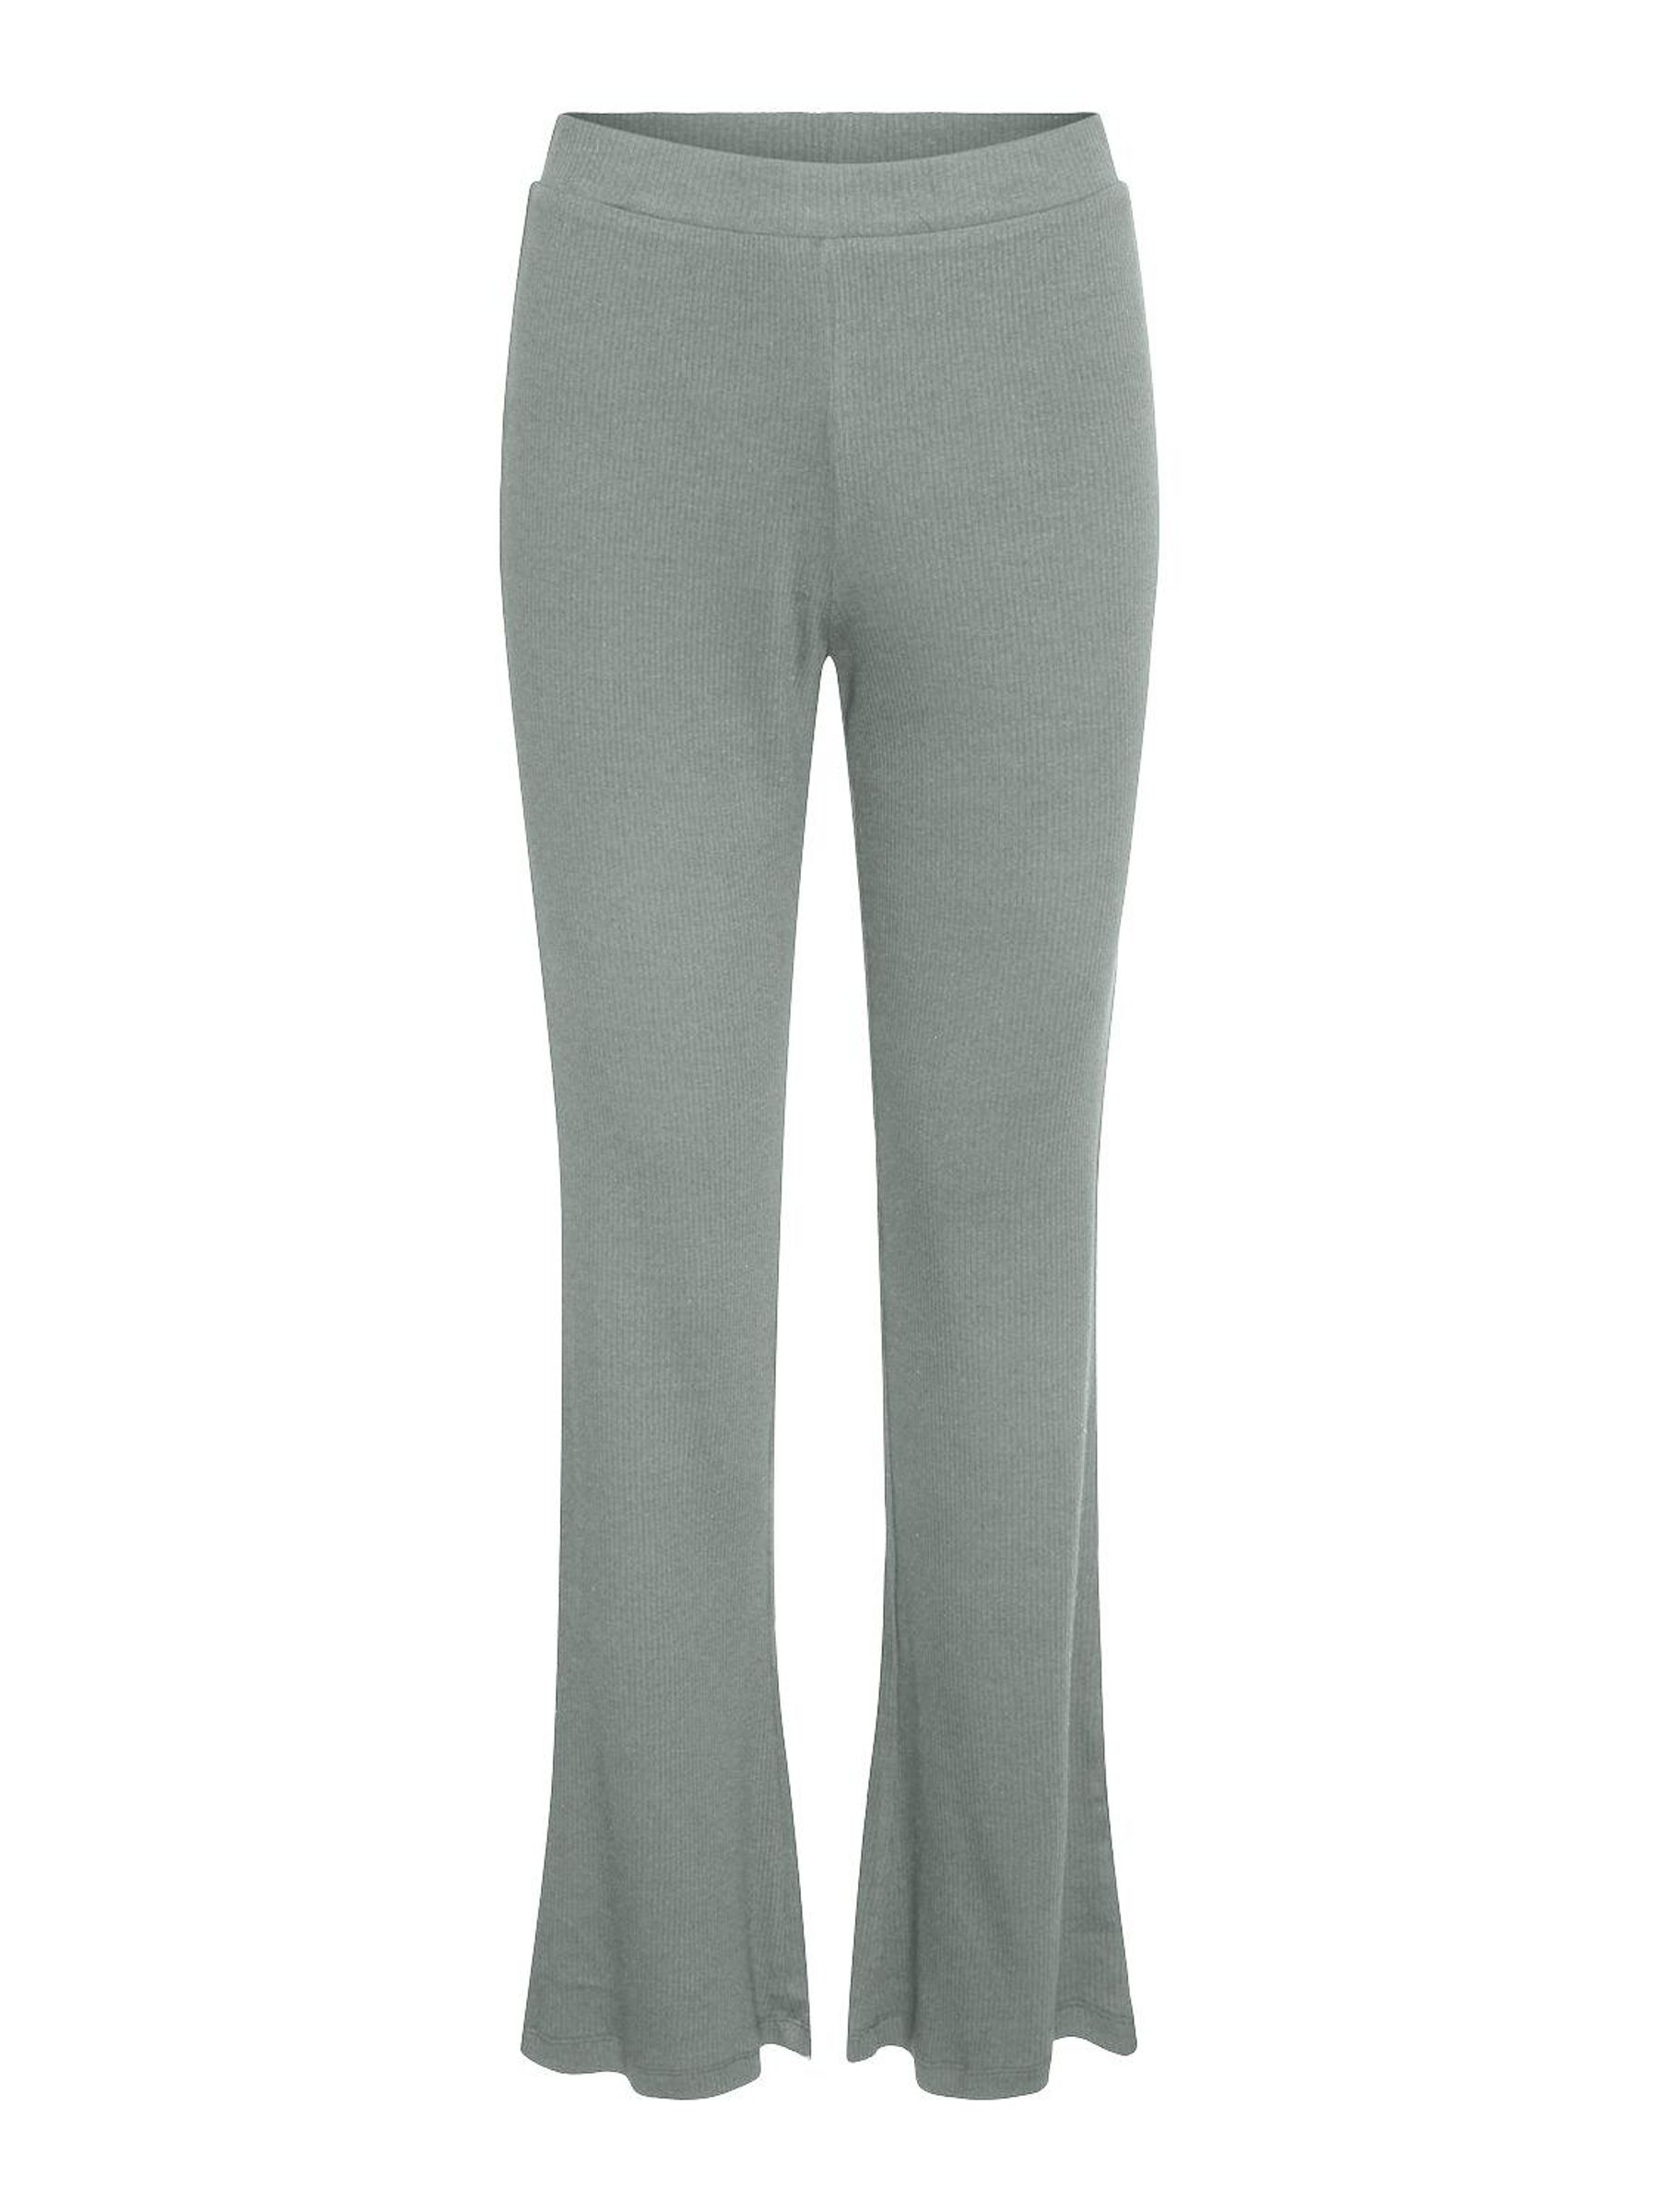 Green HIGH WAIST FLARED TROUSERS | Noisy May®